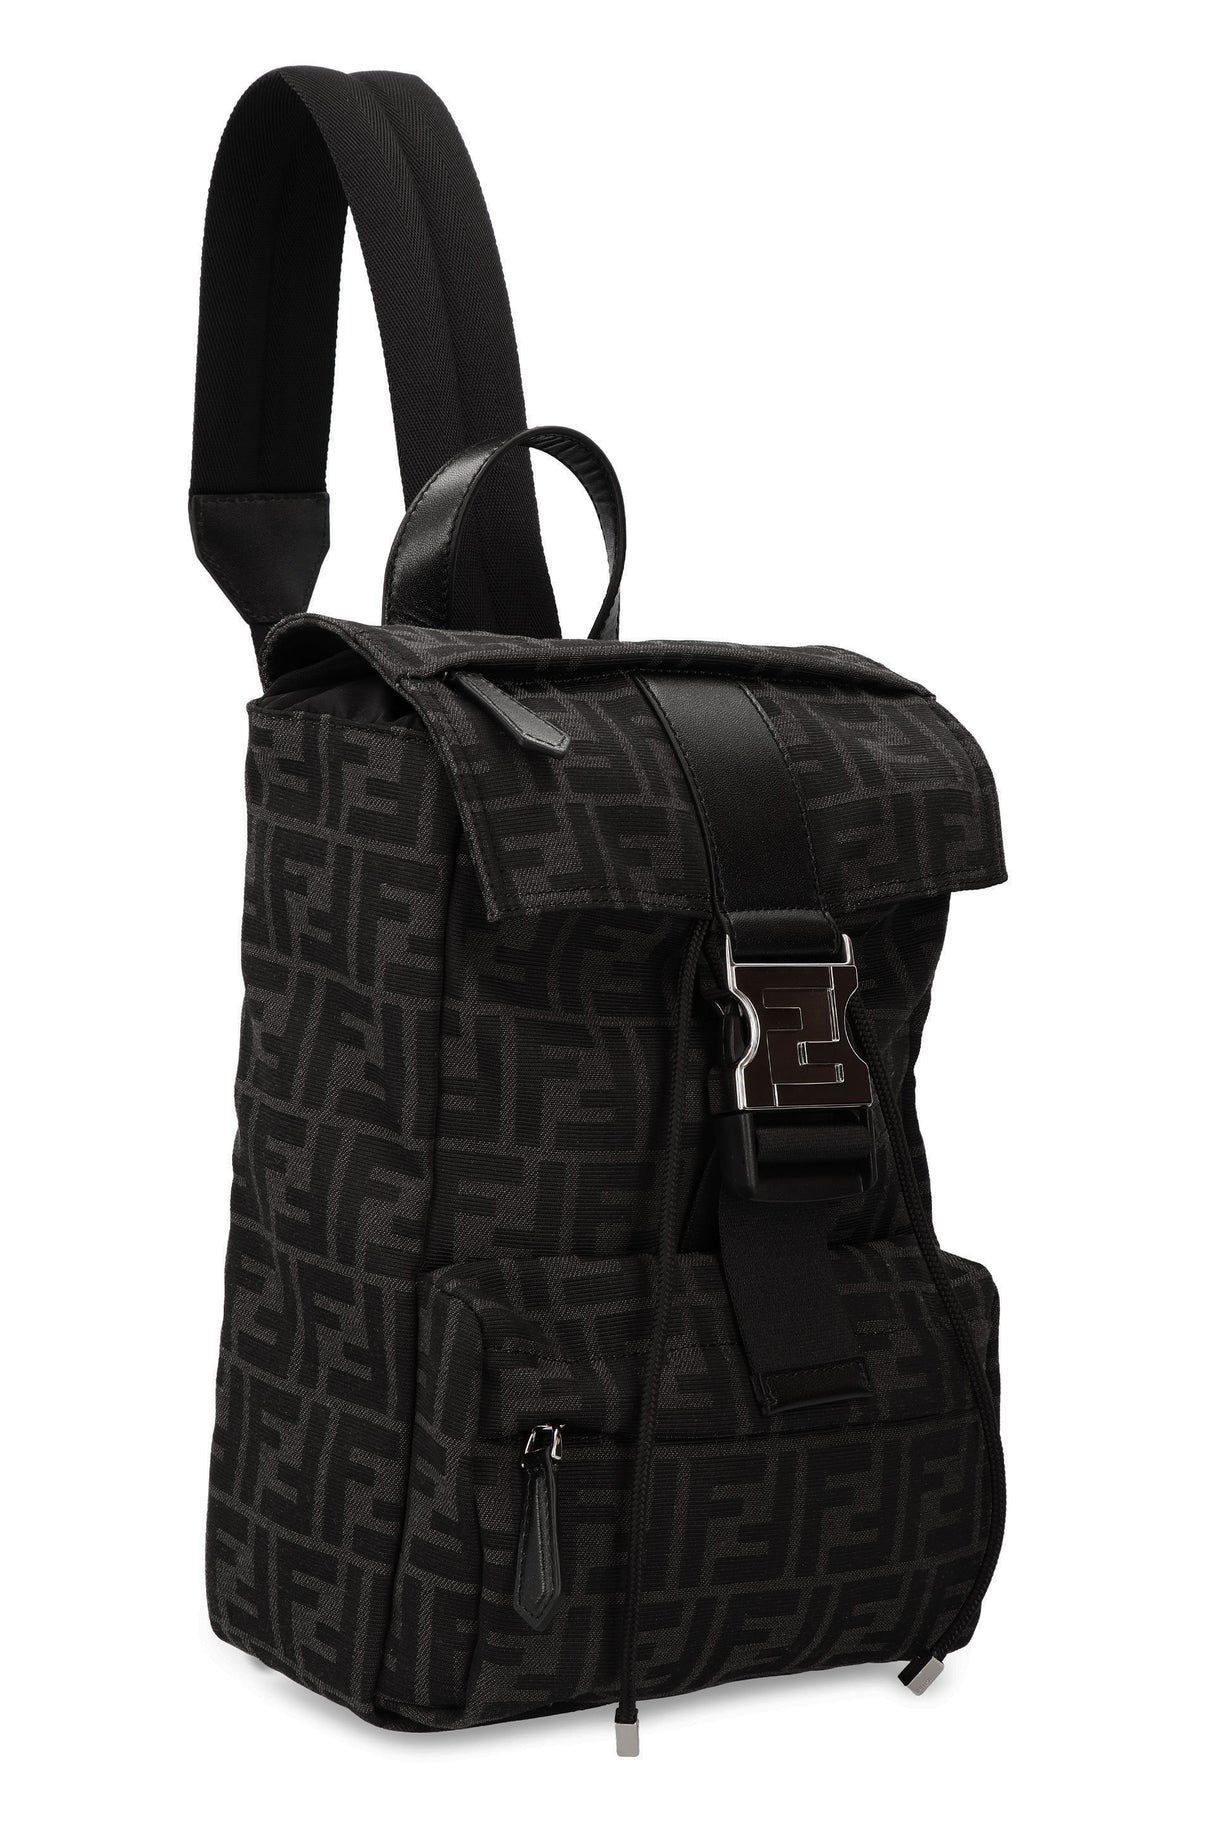 FENDI Men's Gray Fabric Backpack with Leather Details